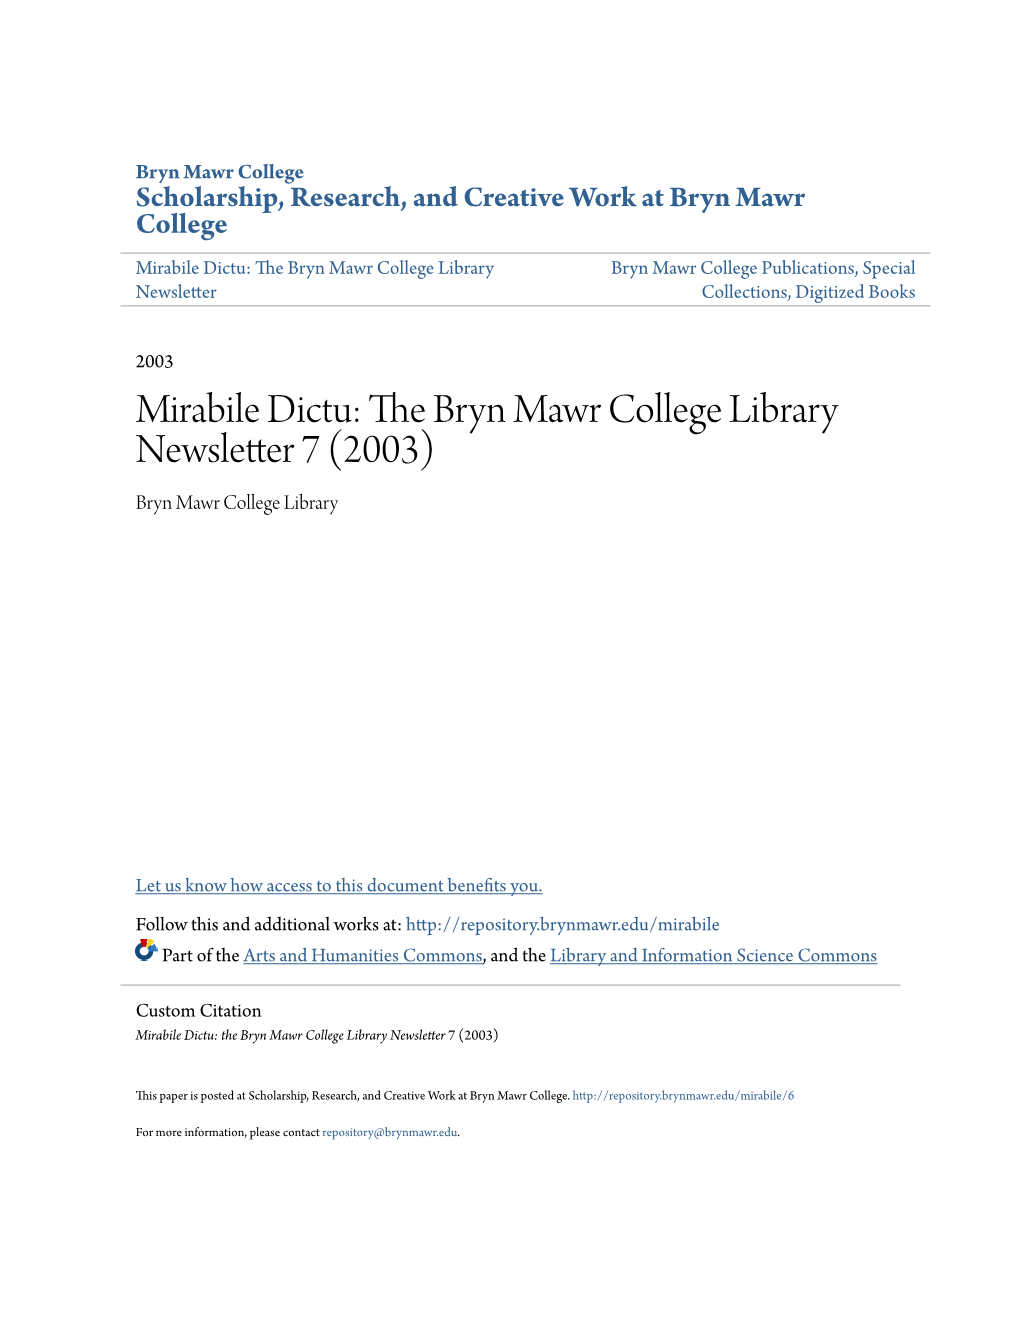 Mirabile Dictu: the Rb Yn Mawr College Library Bryn Mawr College Publications, Special Newsletter Collections, Digitized Books